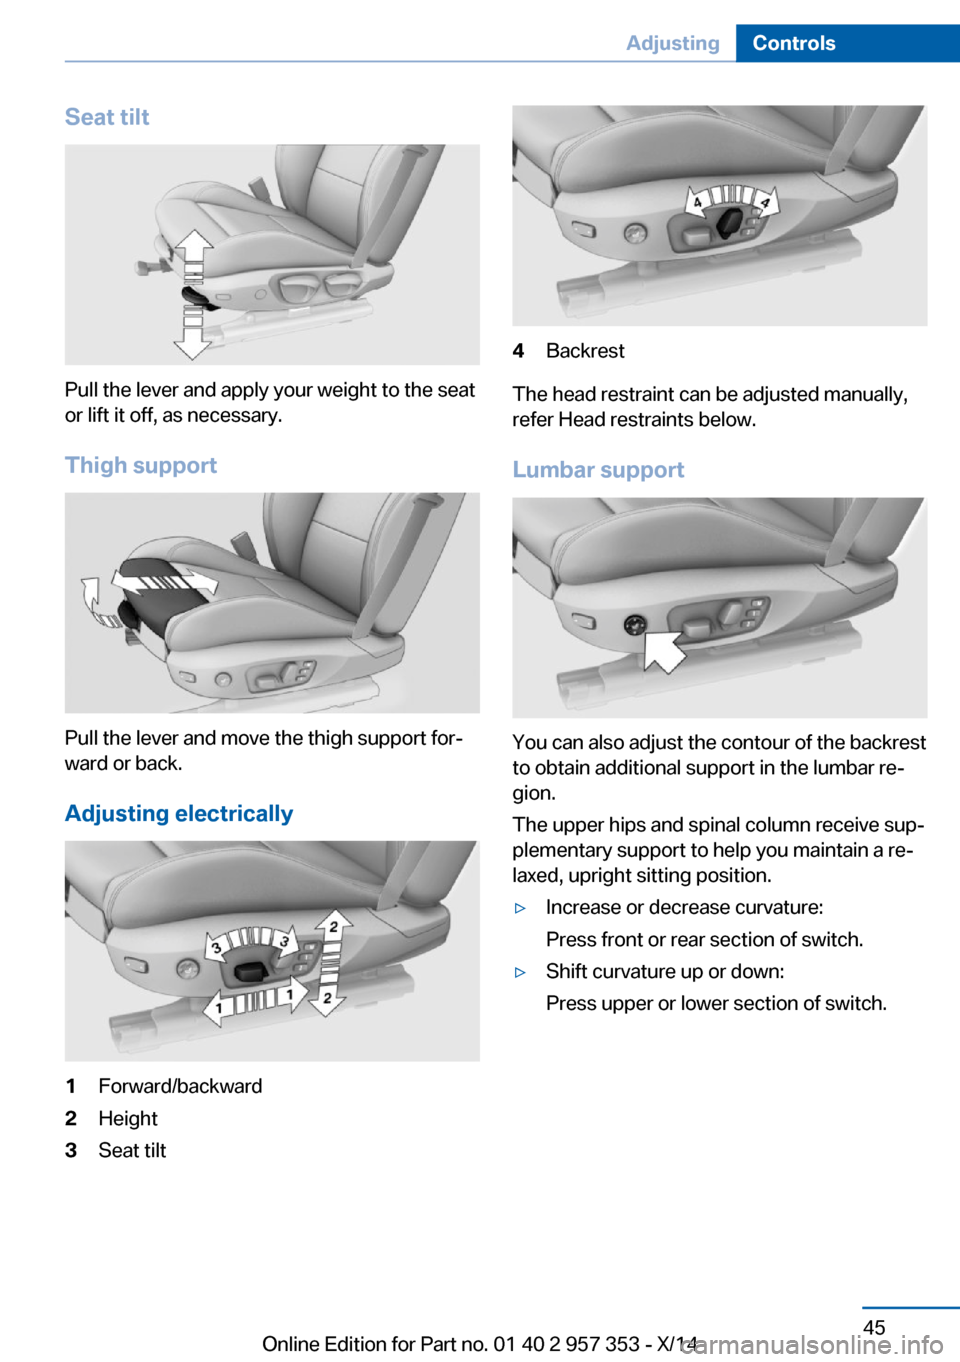 BMW X1 2014 E84 Service Manual Seat tilt
Pull the lever and apply your weight to the seat
or lift it off, as necessary.
Thigh support
Pull the lever and move the thigh support for‐
ward or back.
Adjusting electrically
1Forward/ba